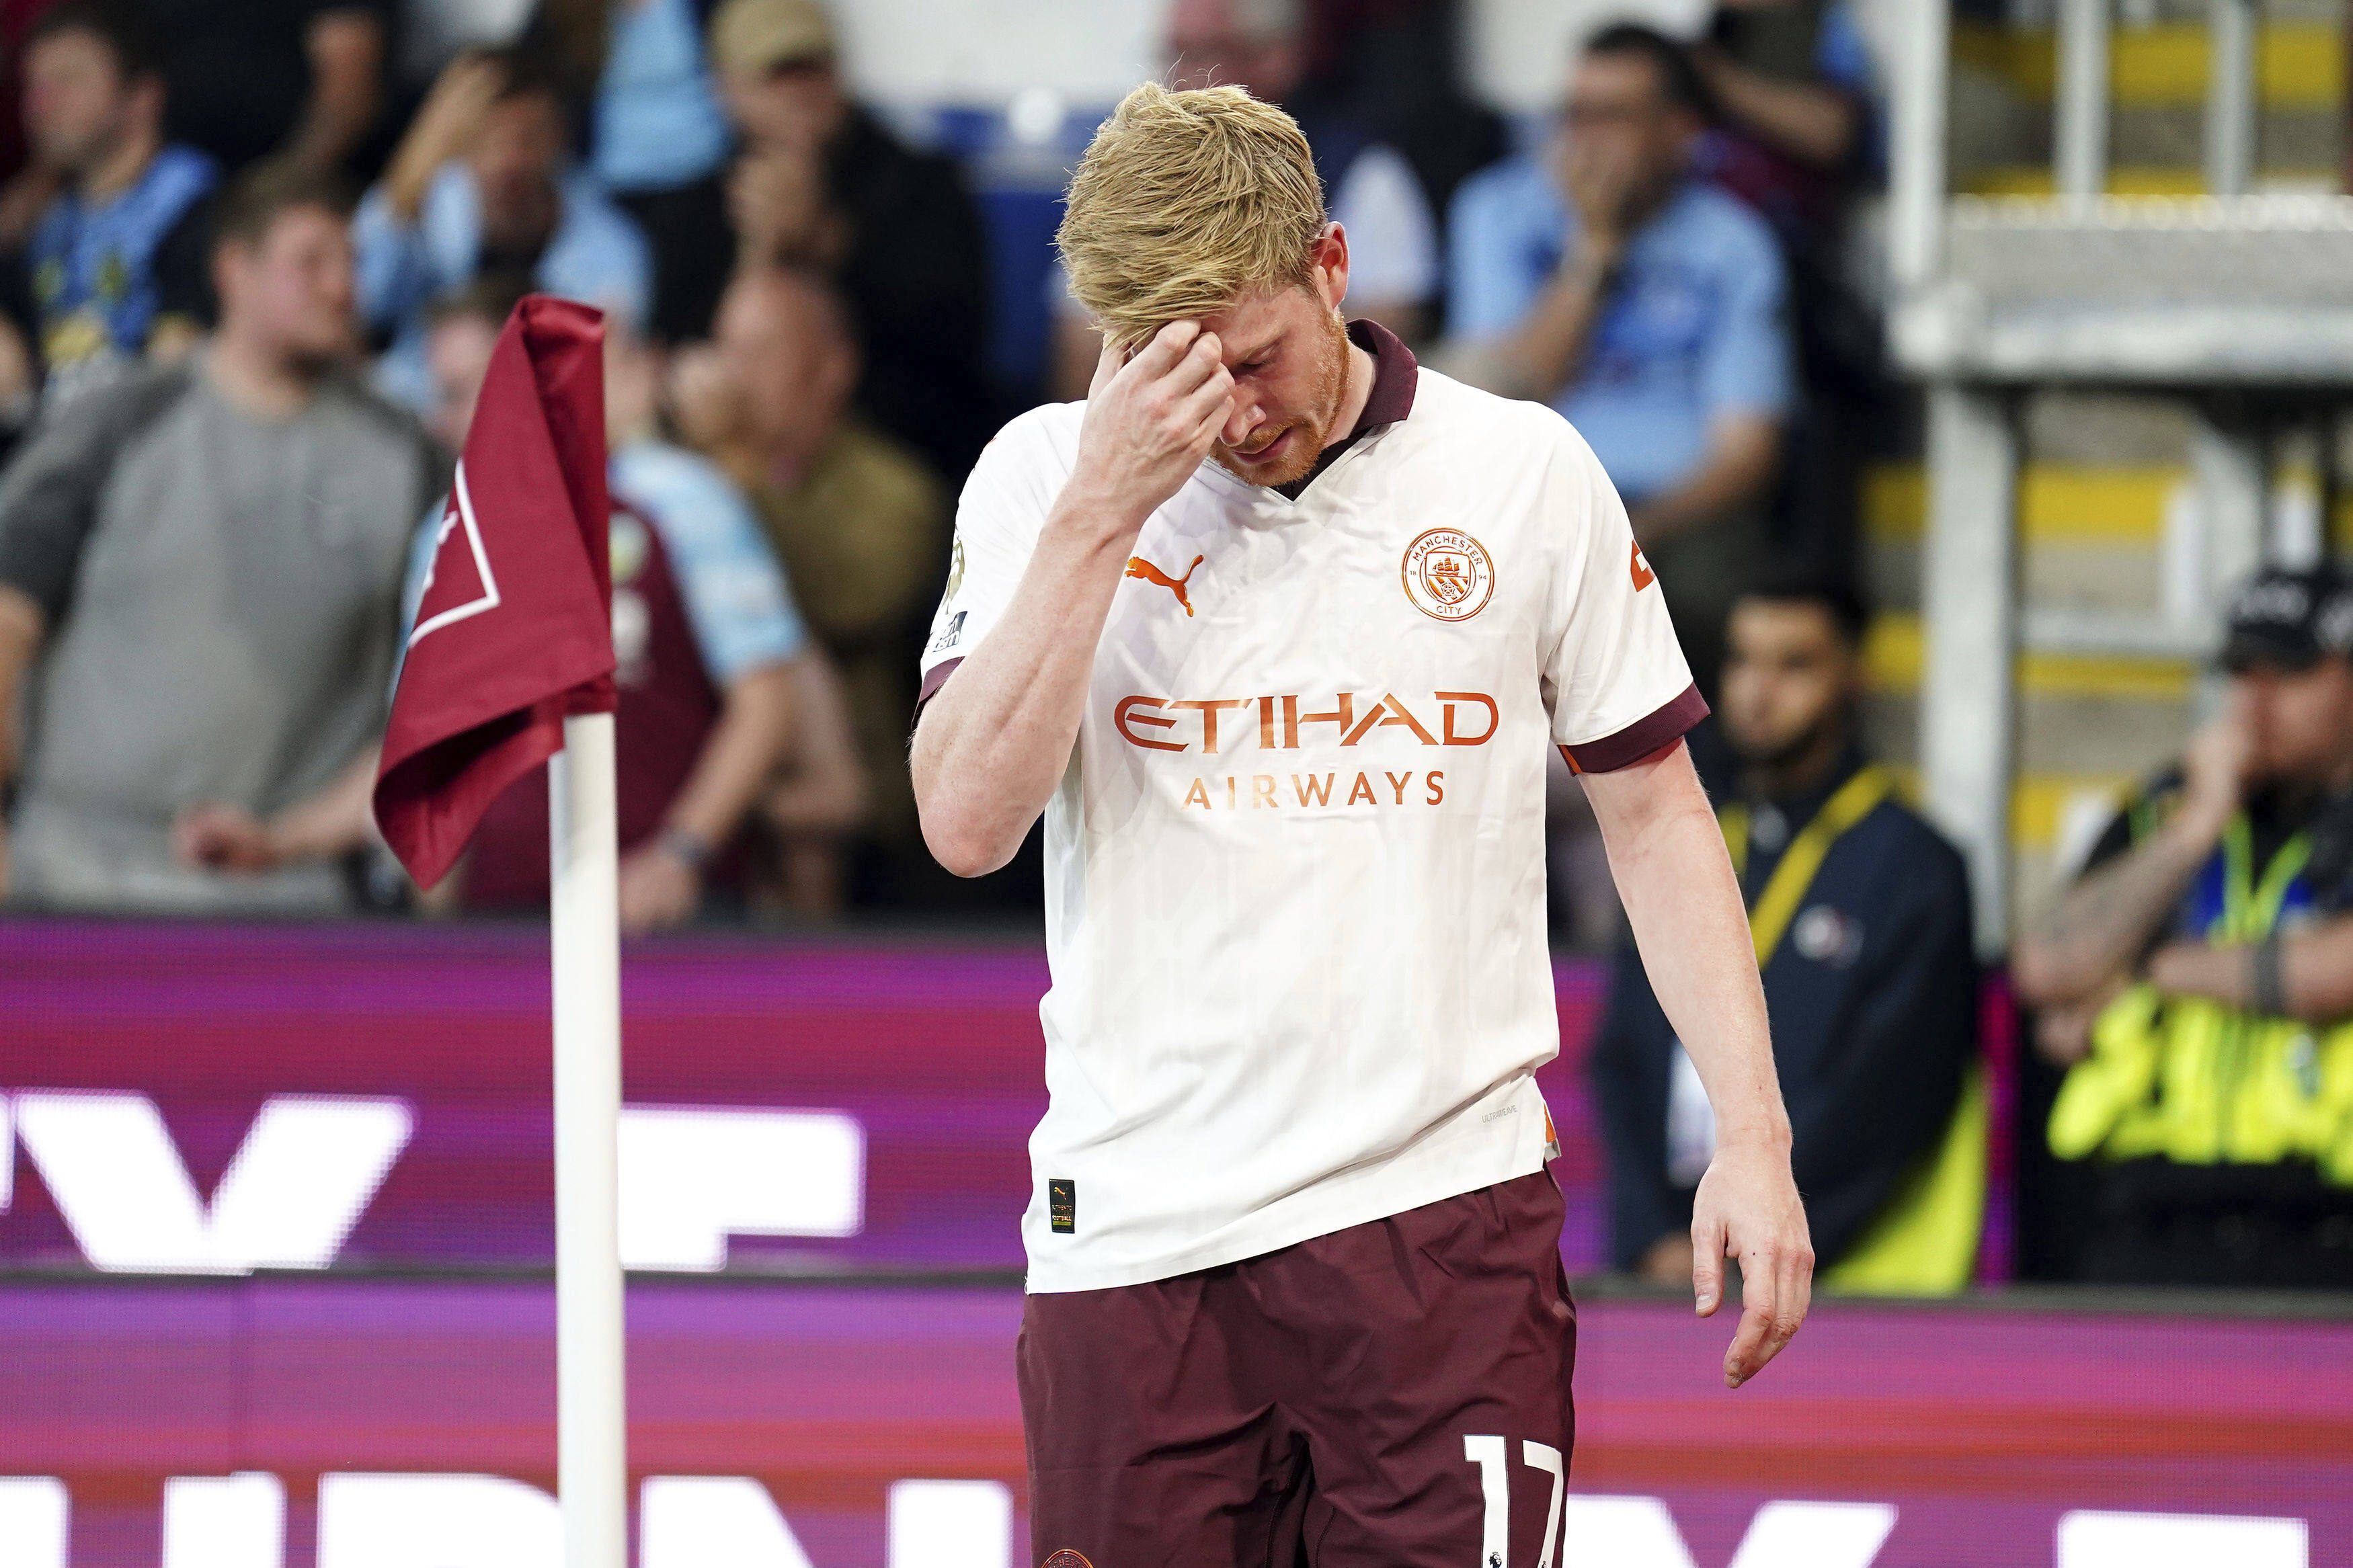 Manchester City’s Kevin De Bruyne deals with a hamstring injury that may require surgery. Photo: AP